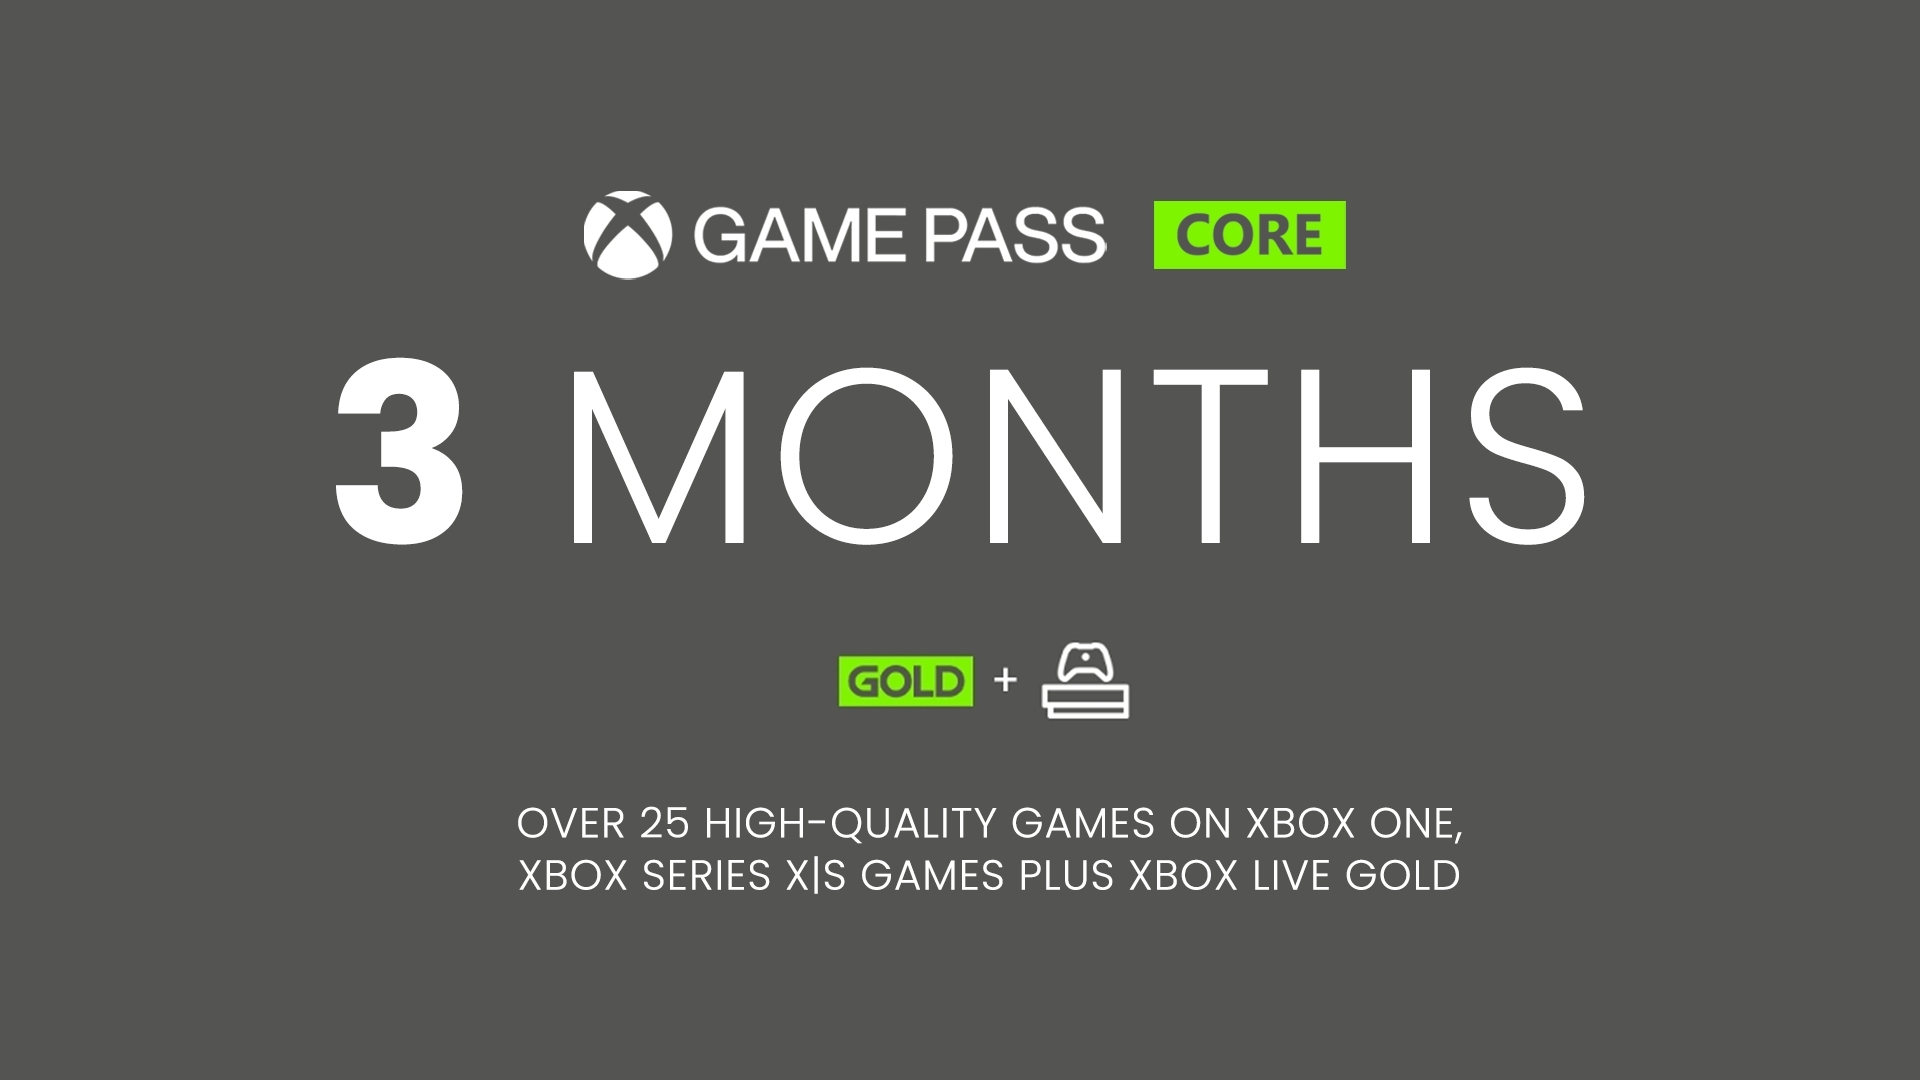 xbox live 3 months free